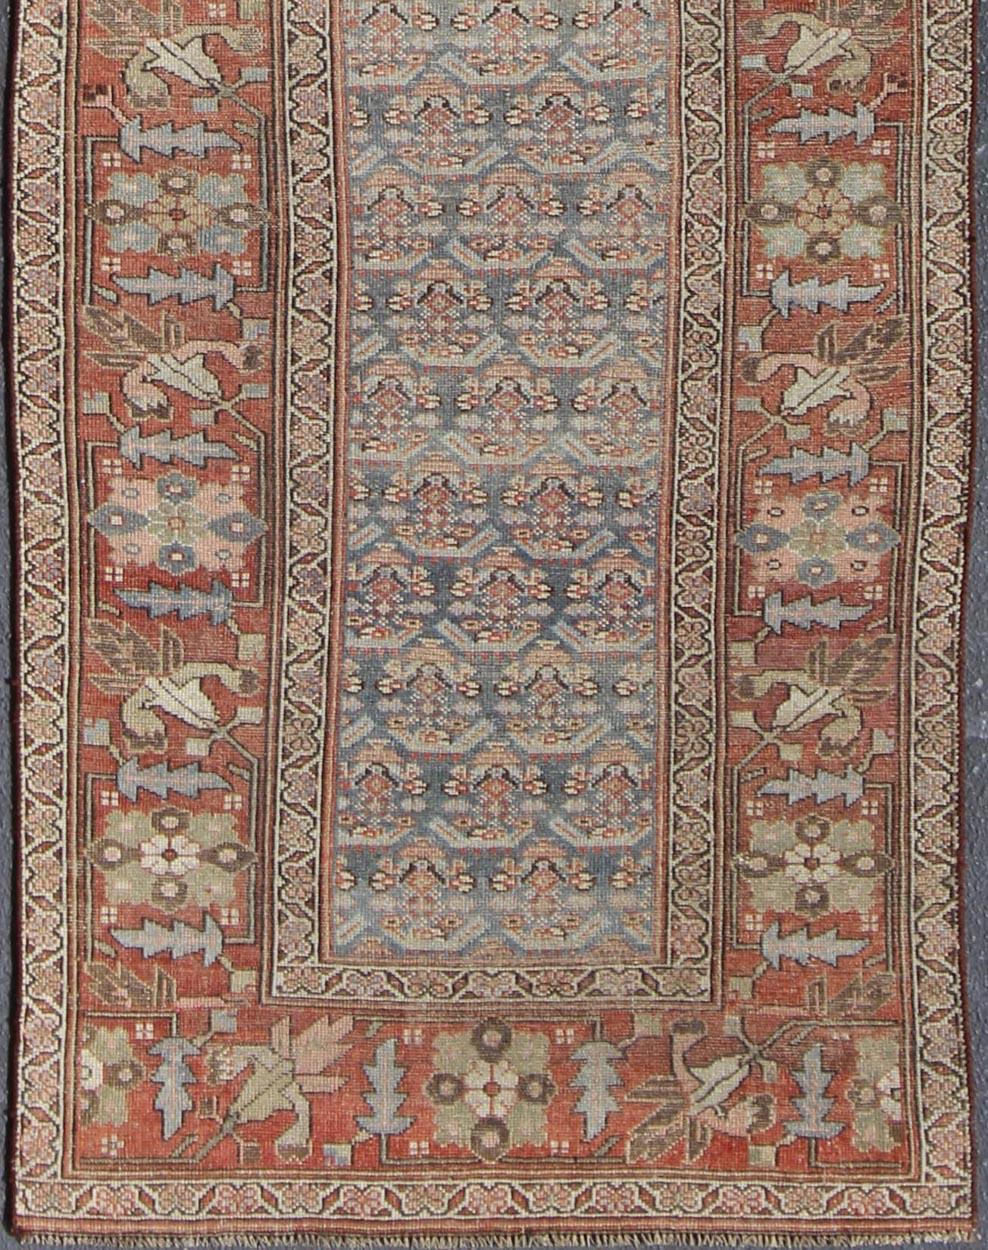 Keivan Woven Arts Gray background and soft red-colored Persian Kurdish antique runner in Tribal design with geometric motifs, rug 19-0105, country of origin / type: Iran / Kurdish, circa 1900.

This antique Kurdish tribal rug was woven by Kurdish